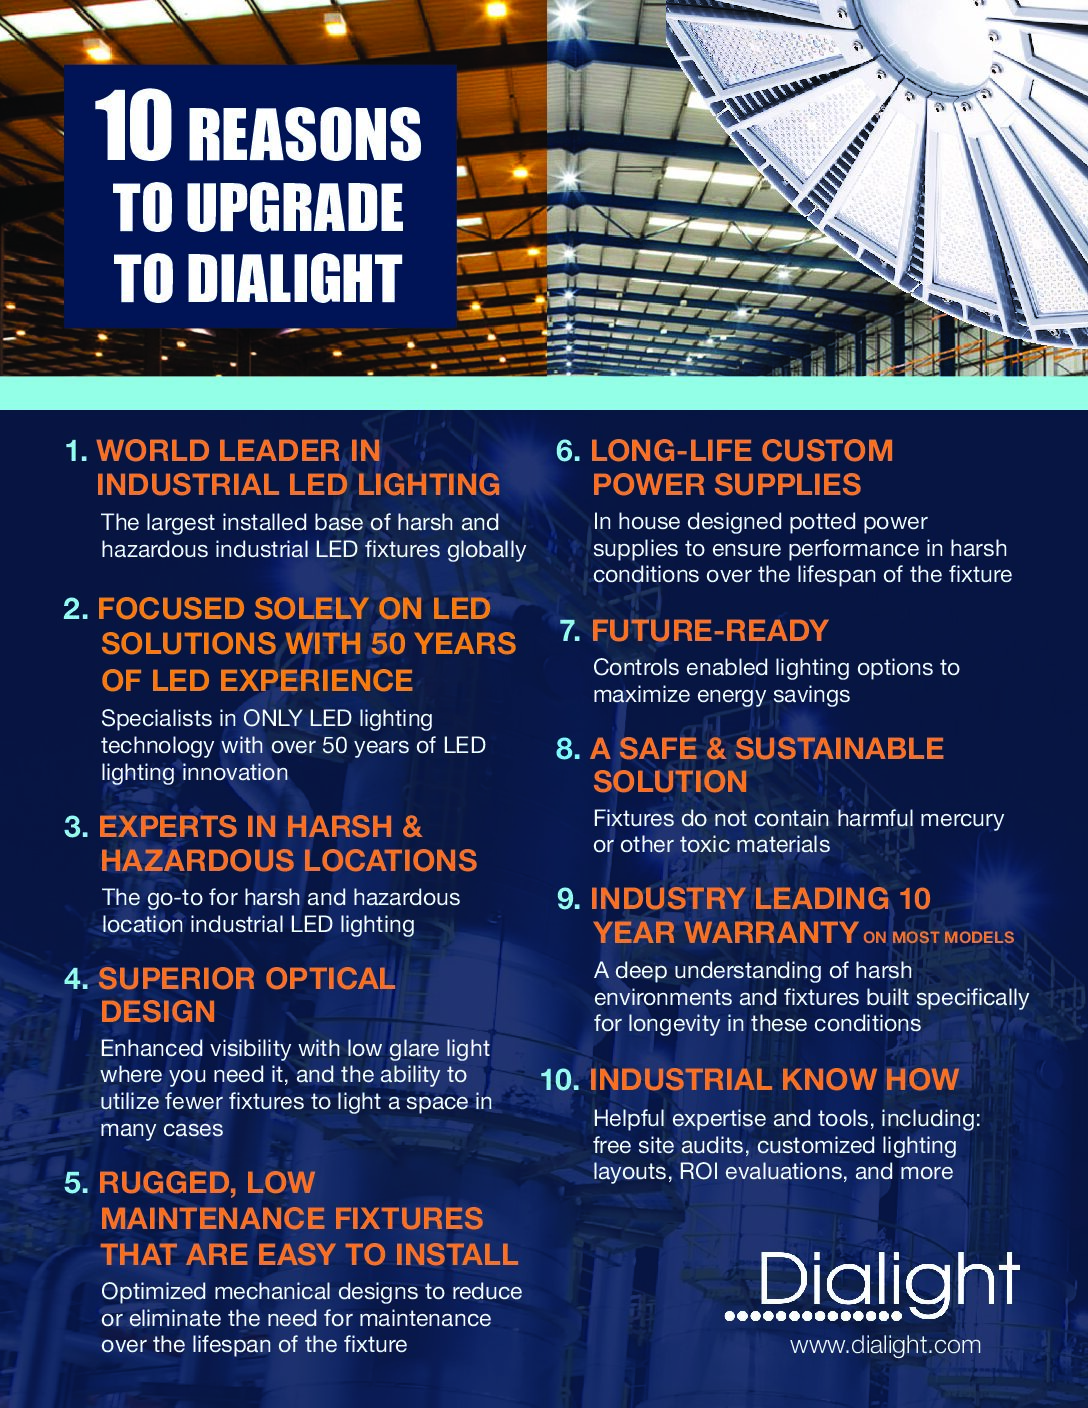 10 Reasons to Upgrade to Dialight